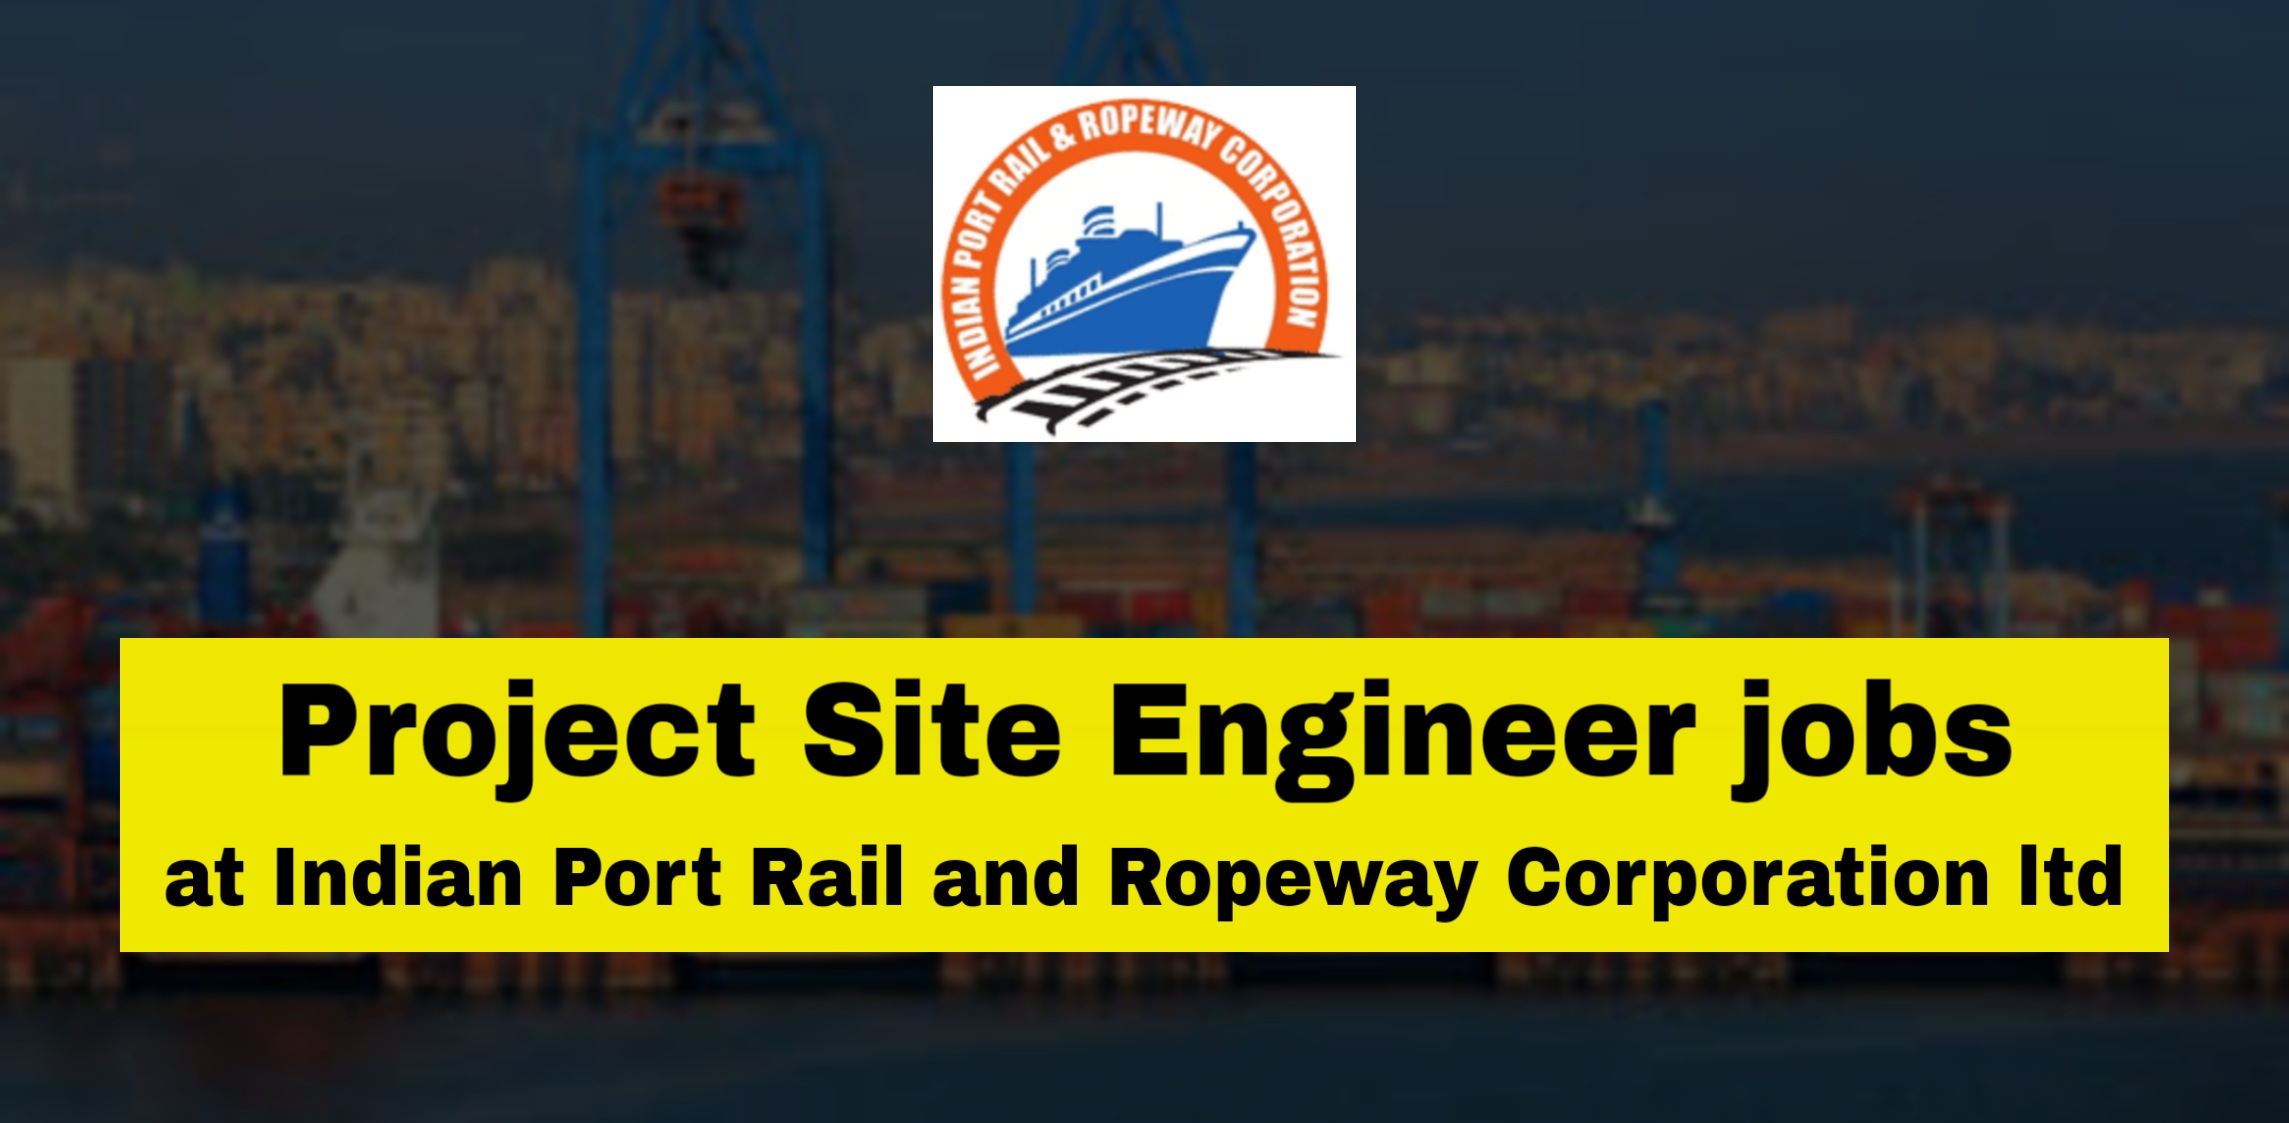 Project Site Engineer Job Vacancies at Indian Port Rail and Ropeway Corporation Limited